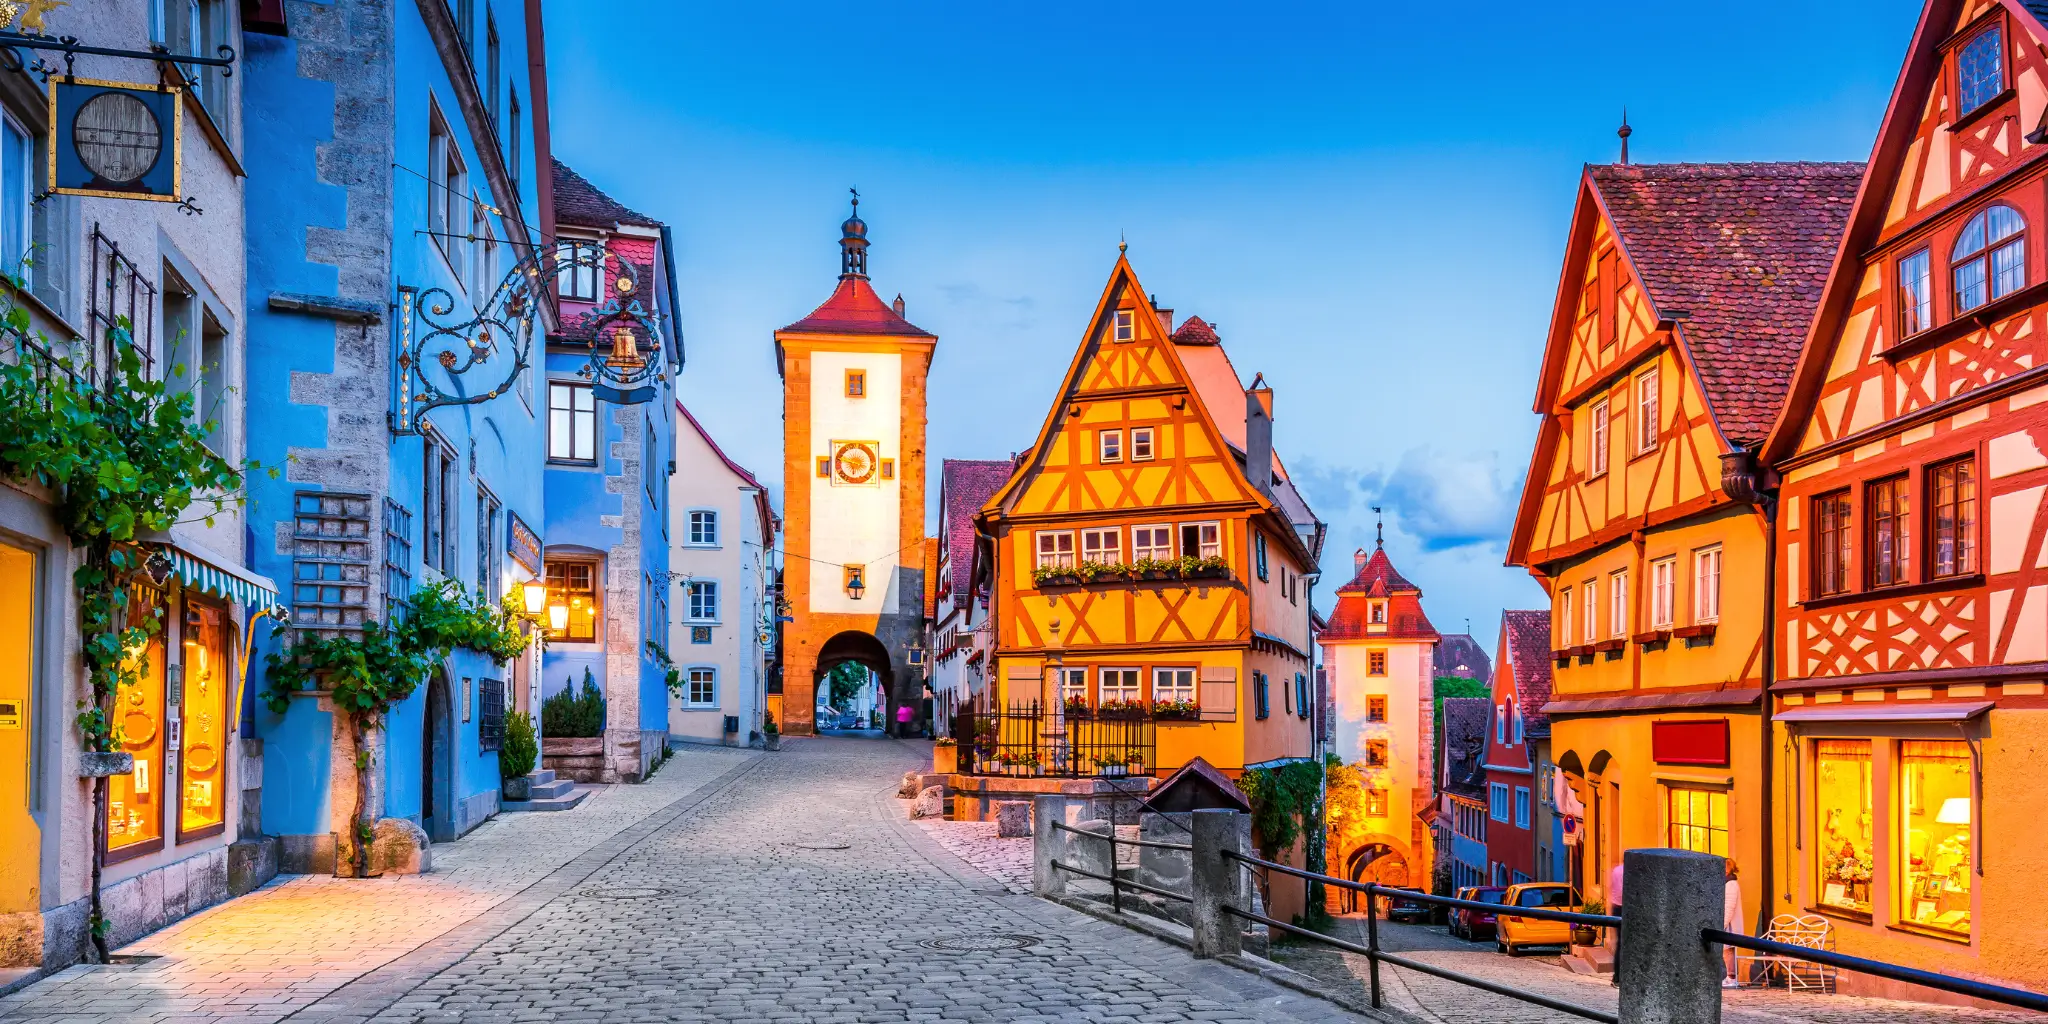 A medieval town in Germany.